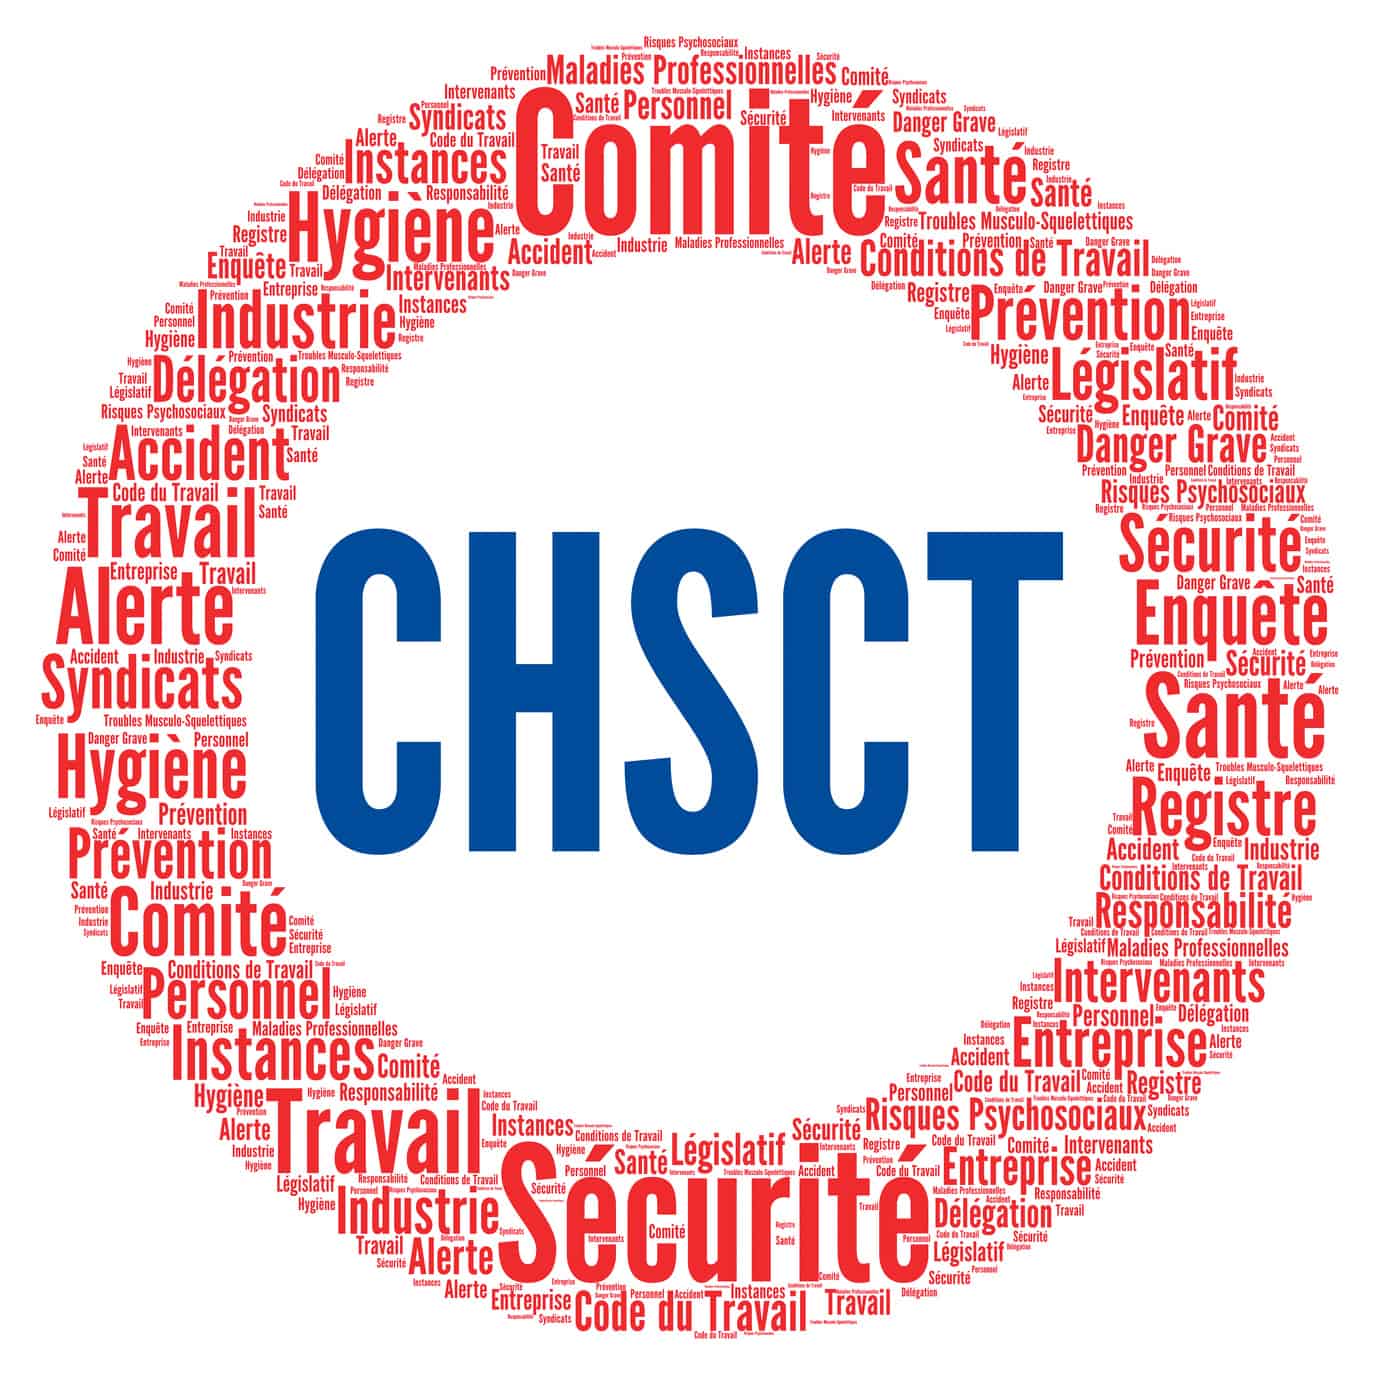 CHSCT guide complet